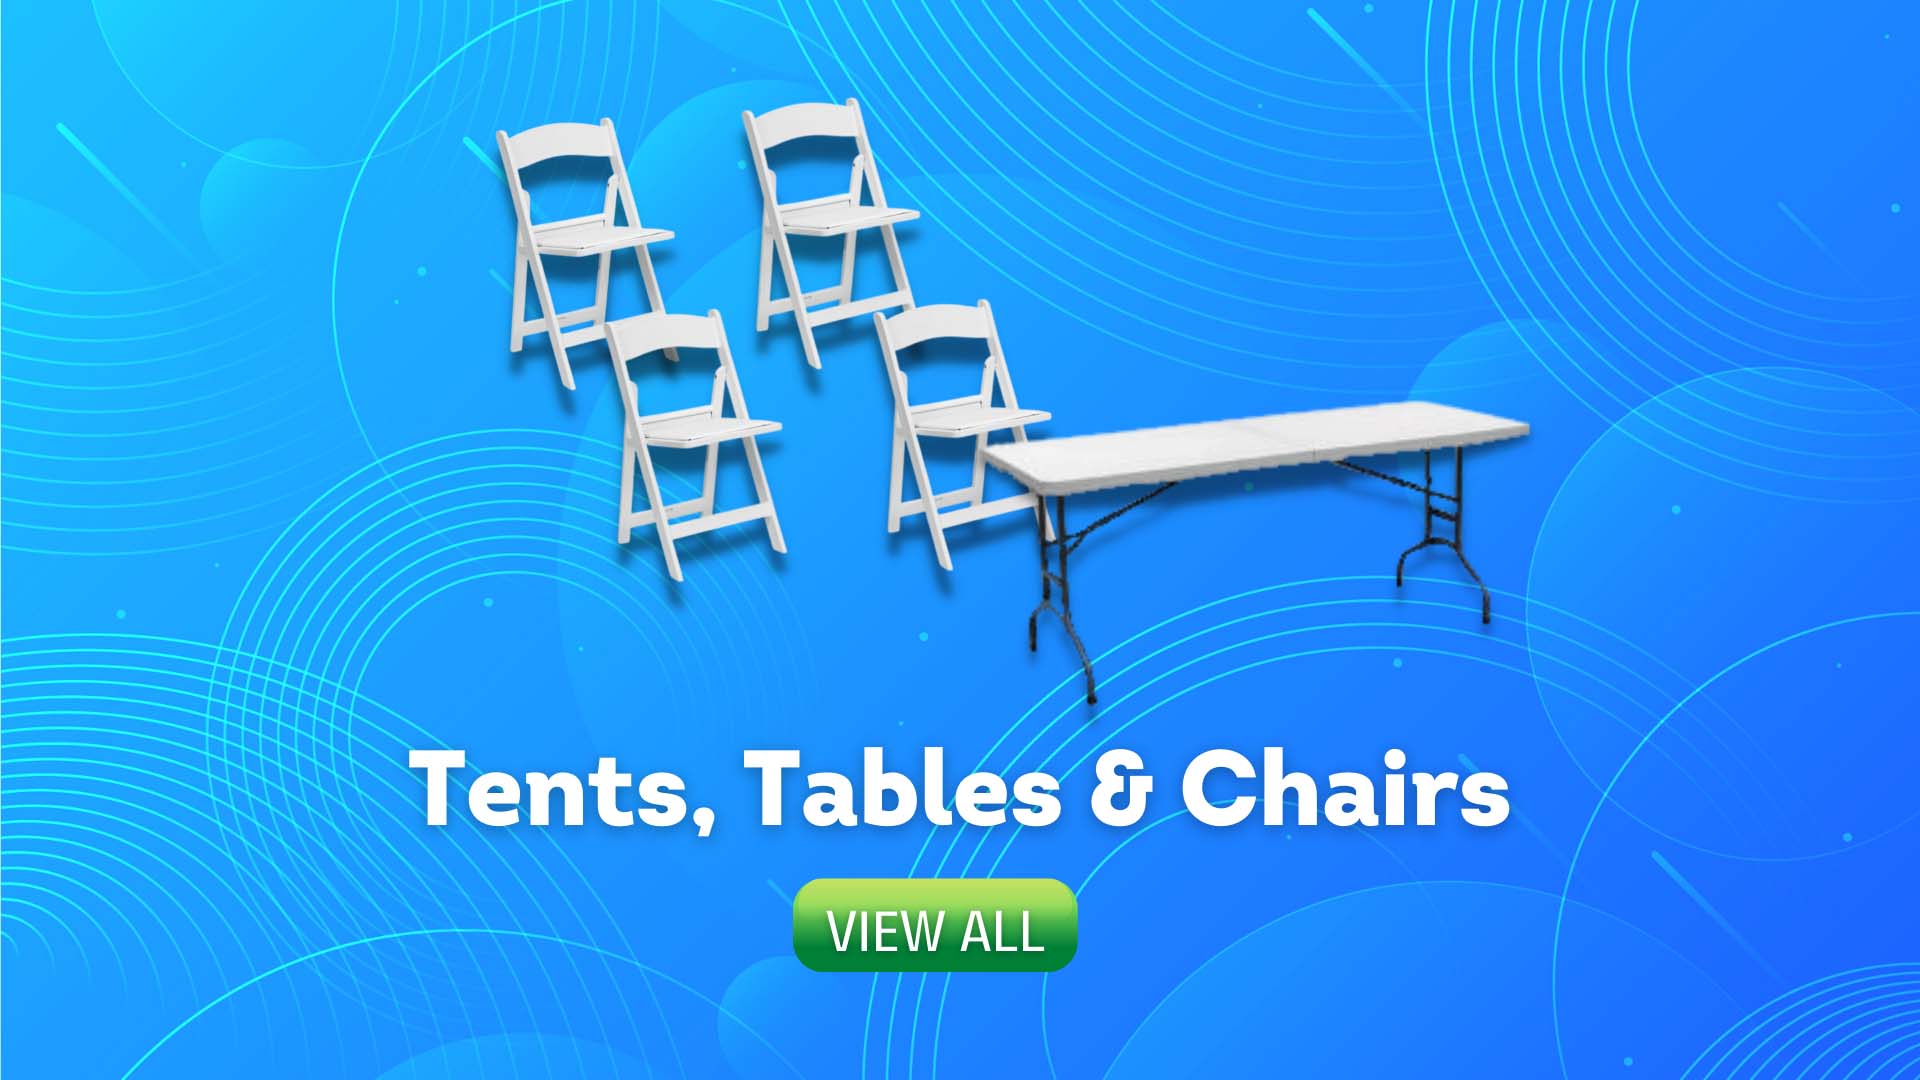 Best Tent Table Chair Rentals in RI